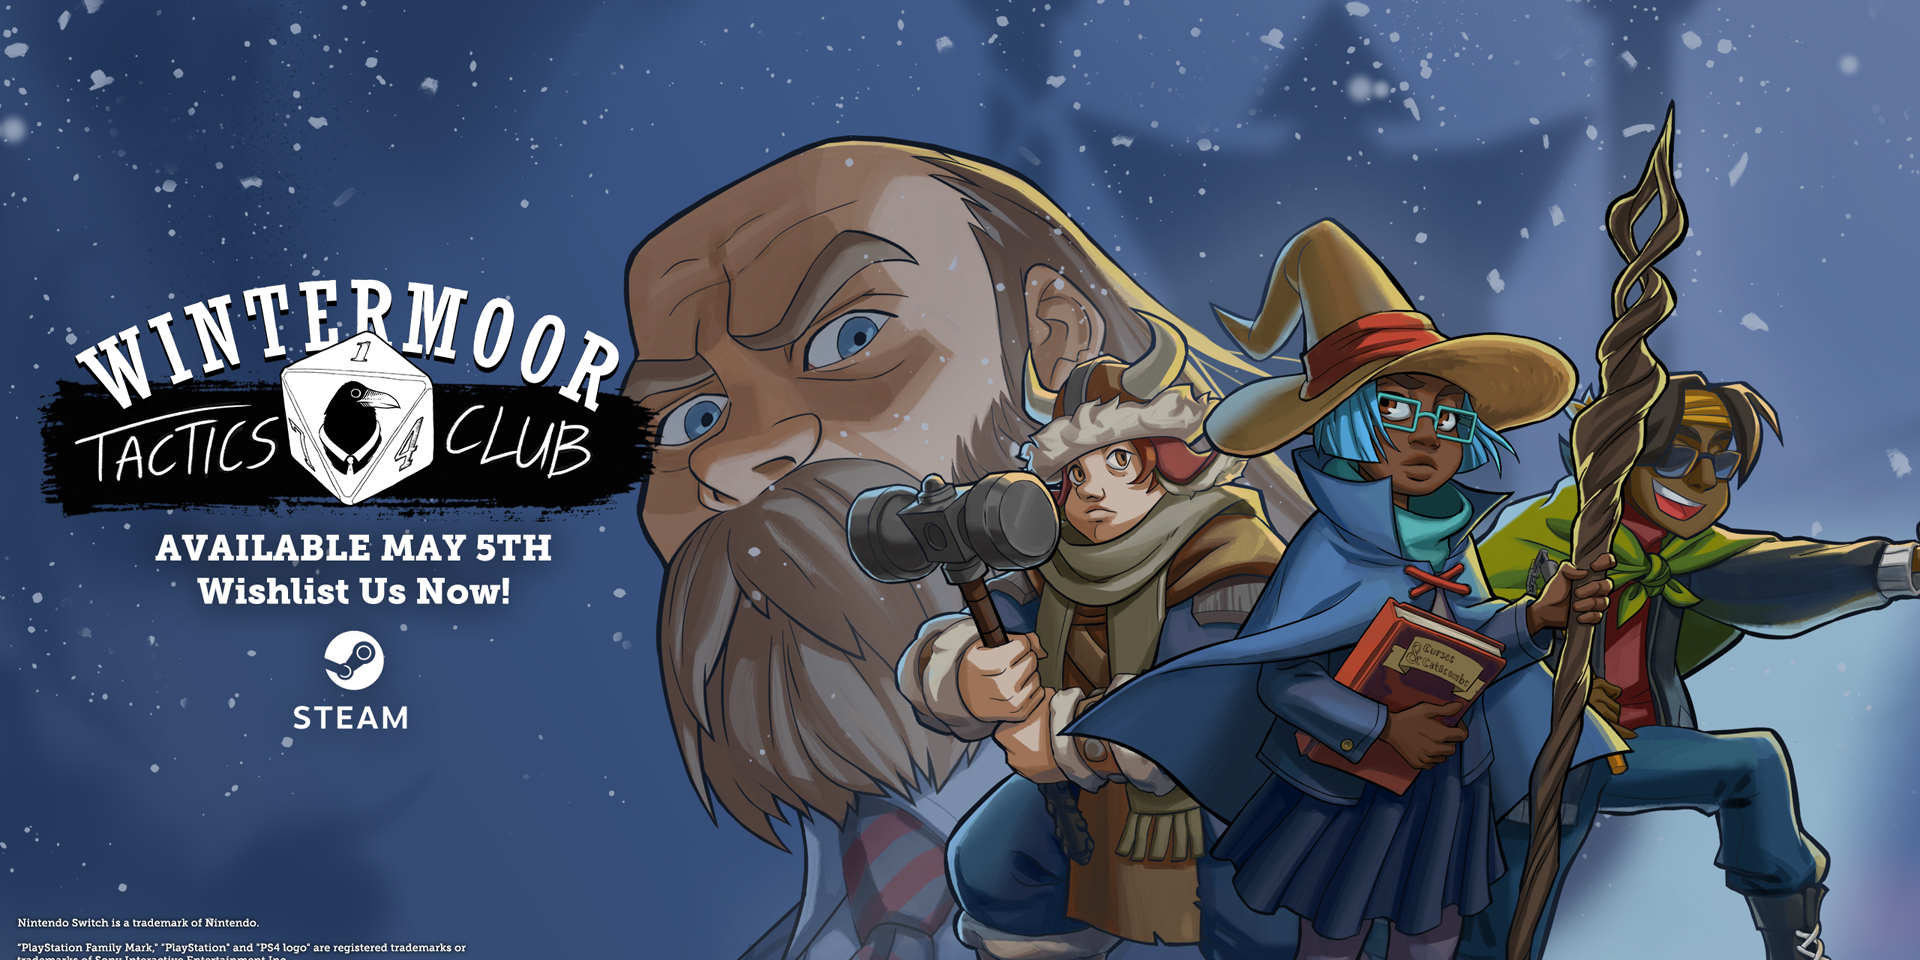 Wintermoor Tactics Club: Join the Snowball Fight May 5